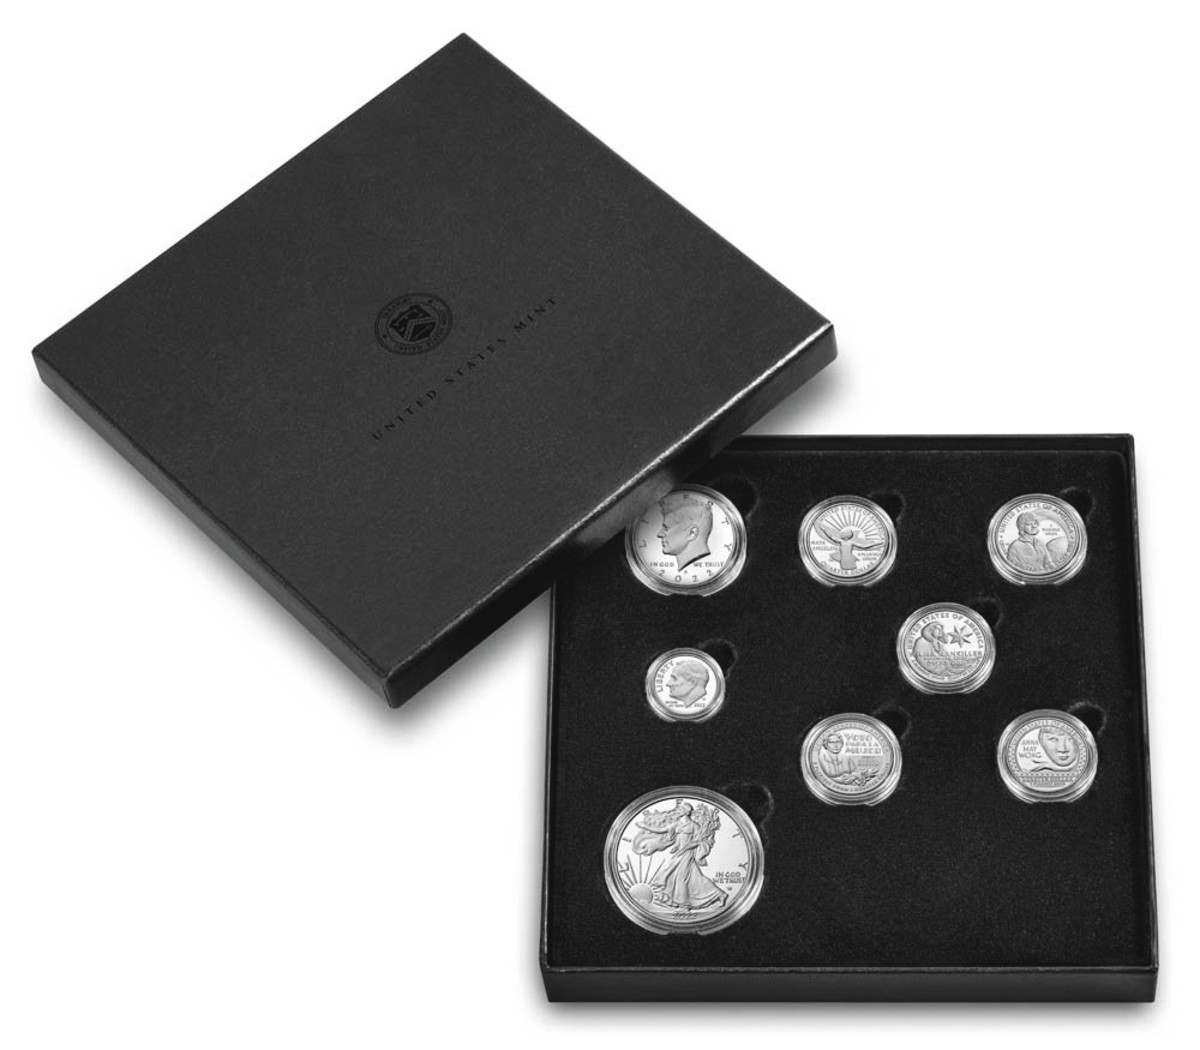 No cent, nickel or golden dollar coins are to be found in the all-silver coin set from the U.S. Mint. (Image courtesy United States Mint.)